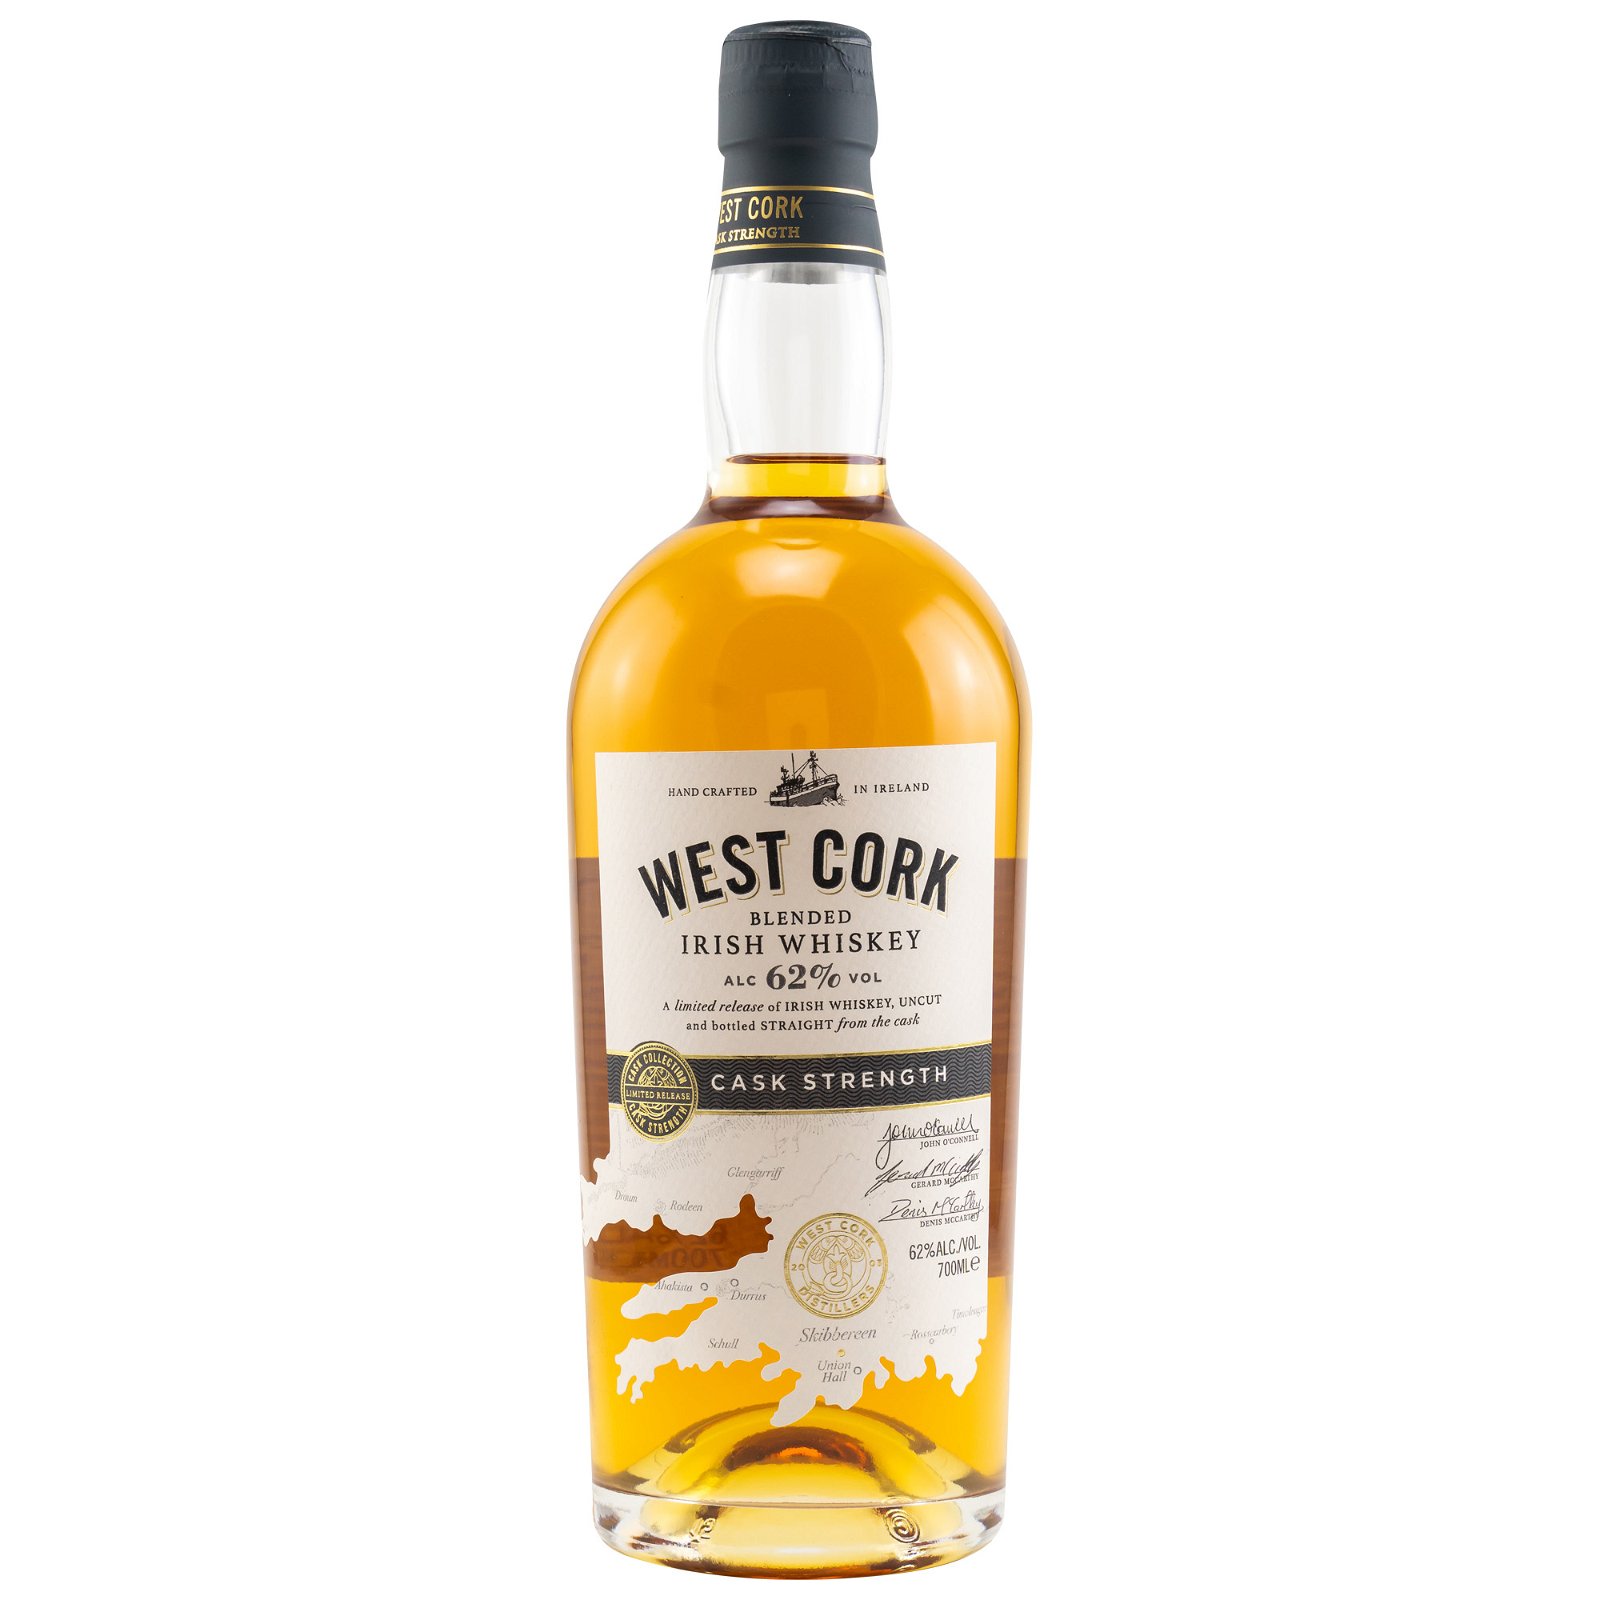 West Cork Cask Strength Blended Irish Whiskey - Limited Release (Irland)